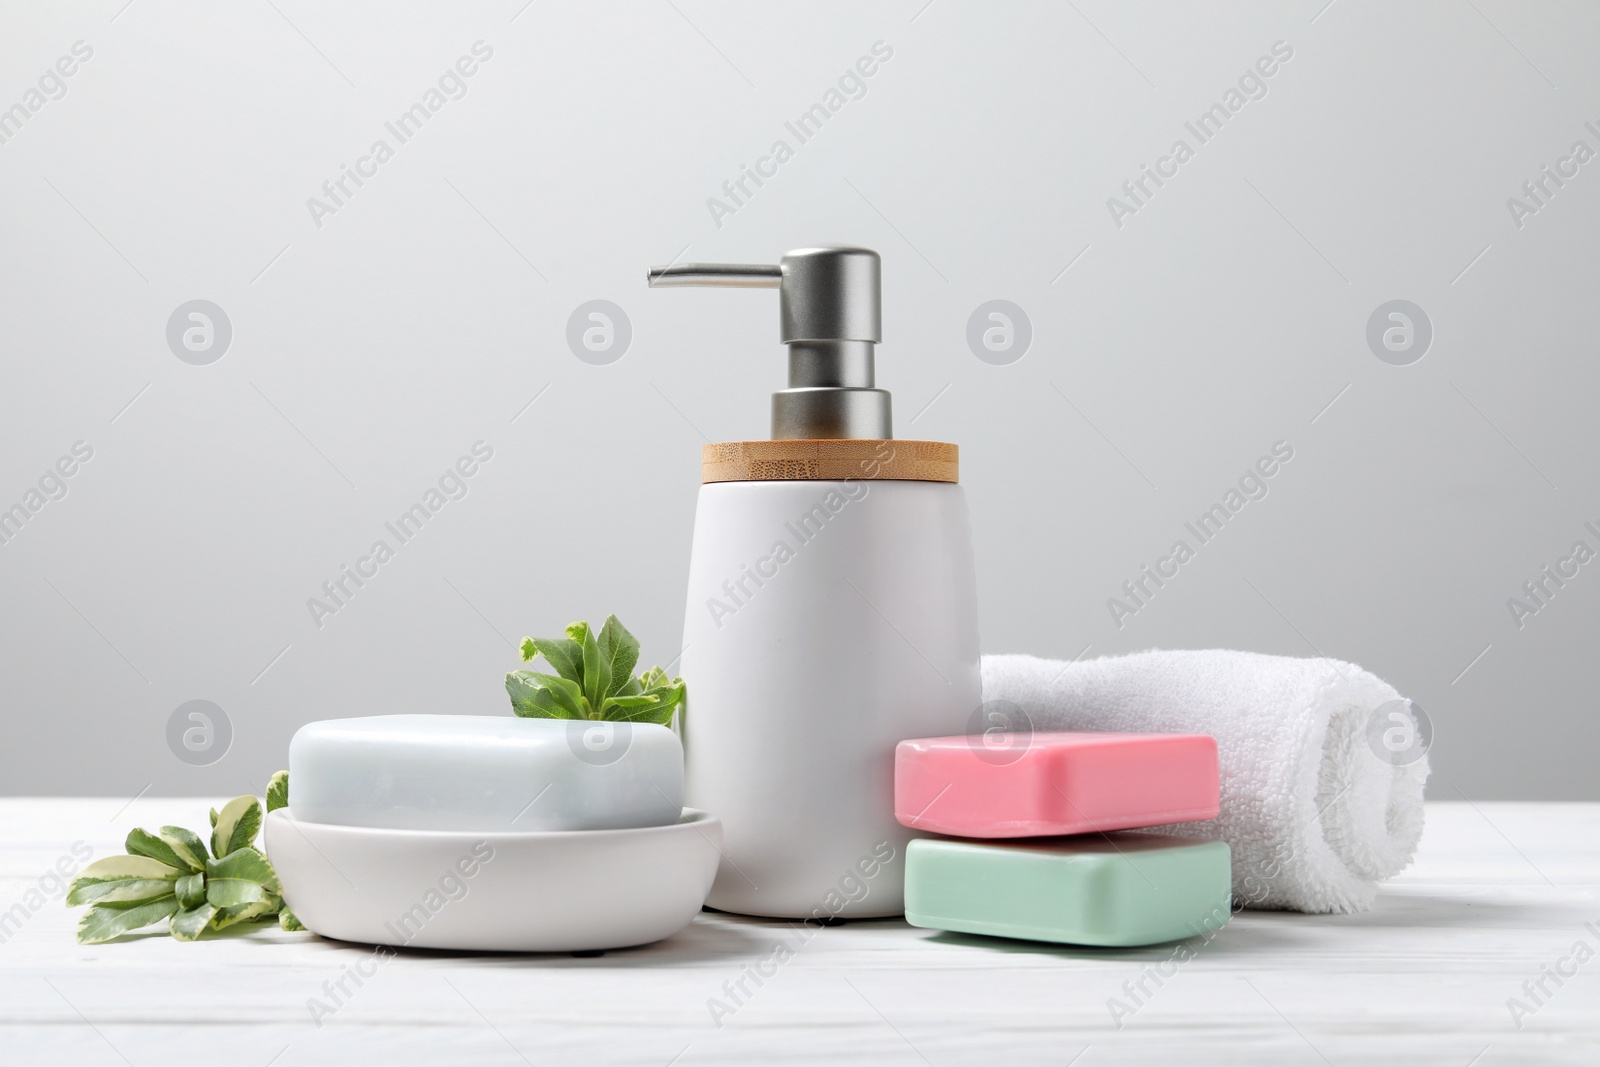 Photo of Soap bars, bottle dispenser and towel on table against white background